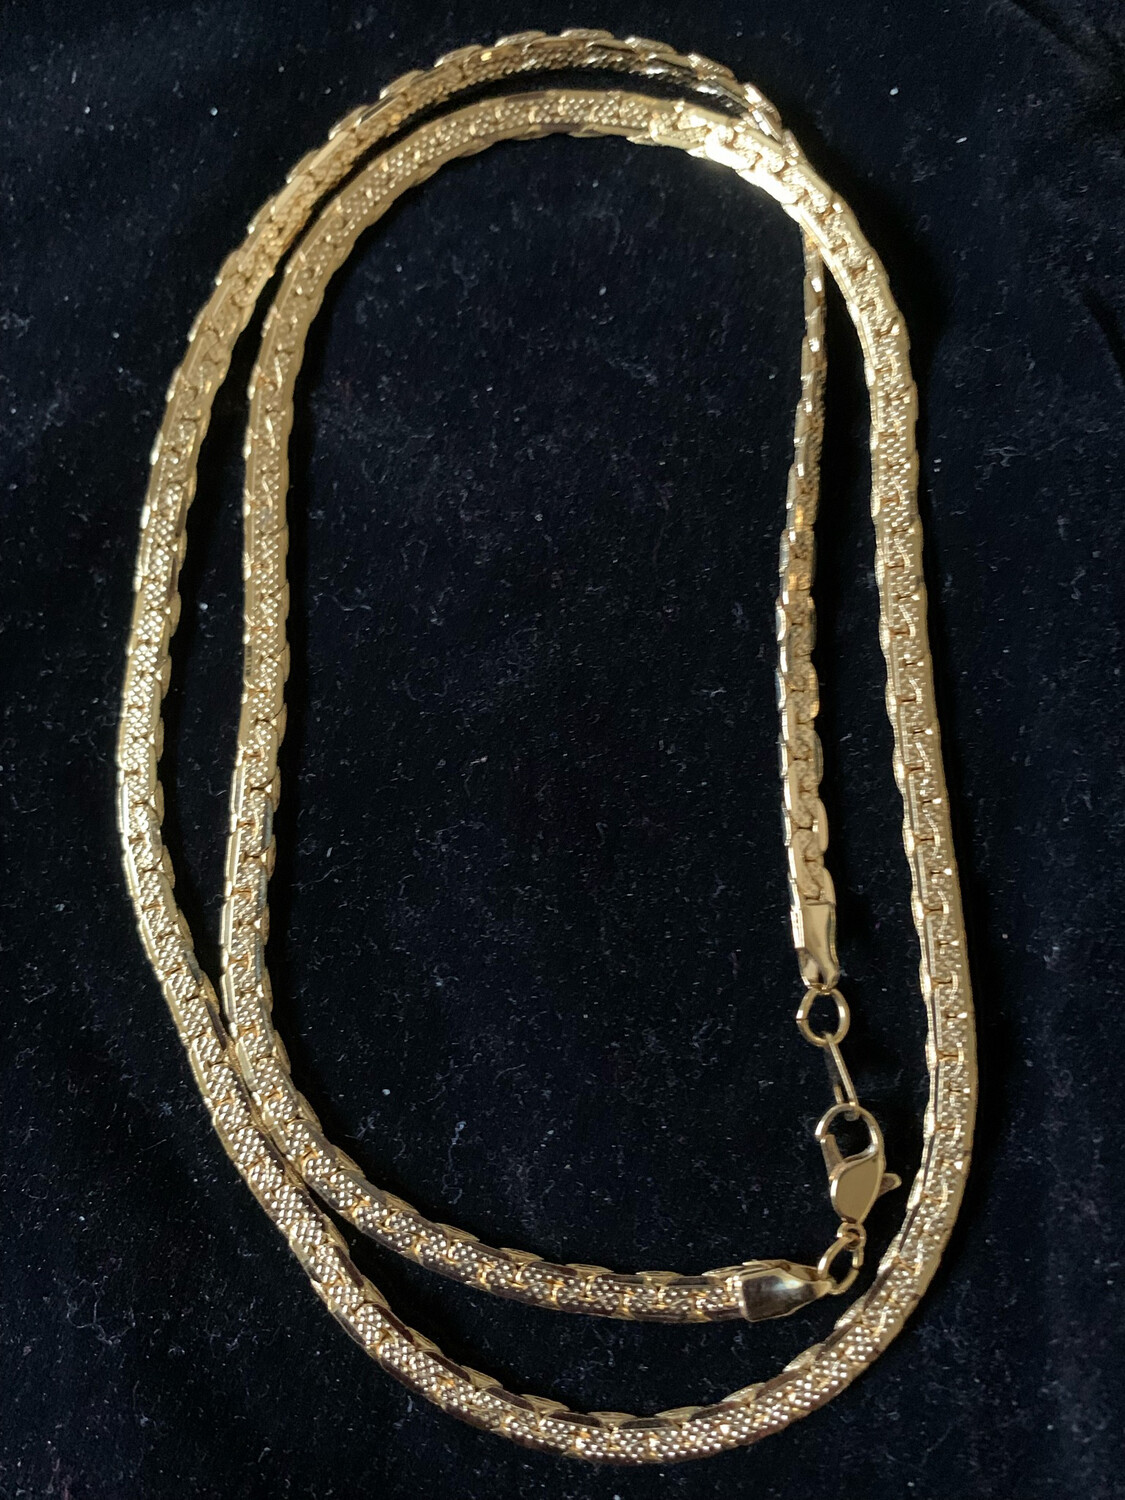 24" 24K Gold Plated 5mm Flat Link Chain with Lobster Claw Clasp